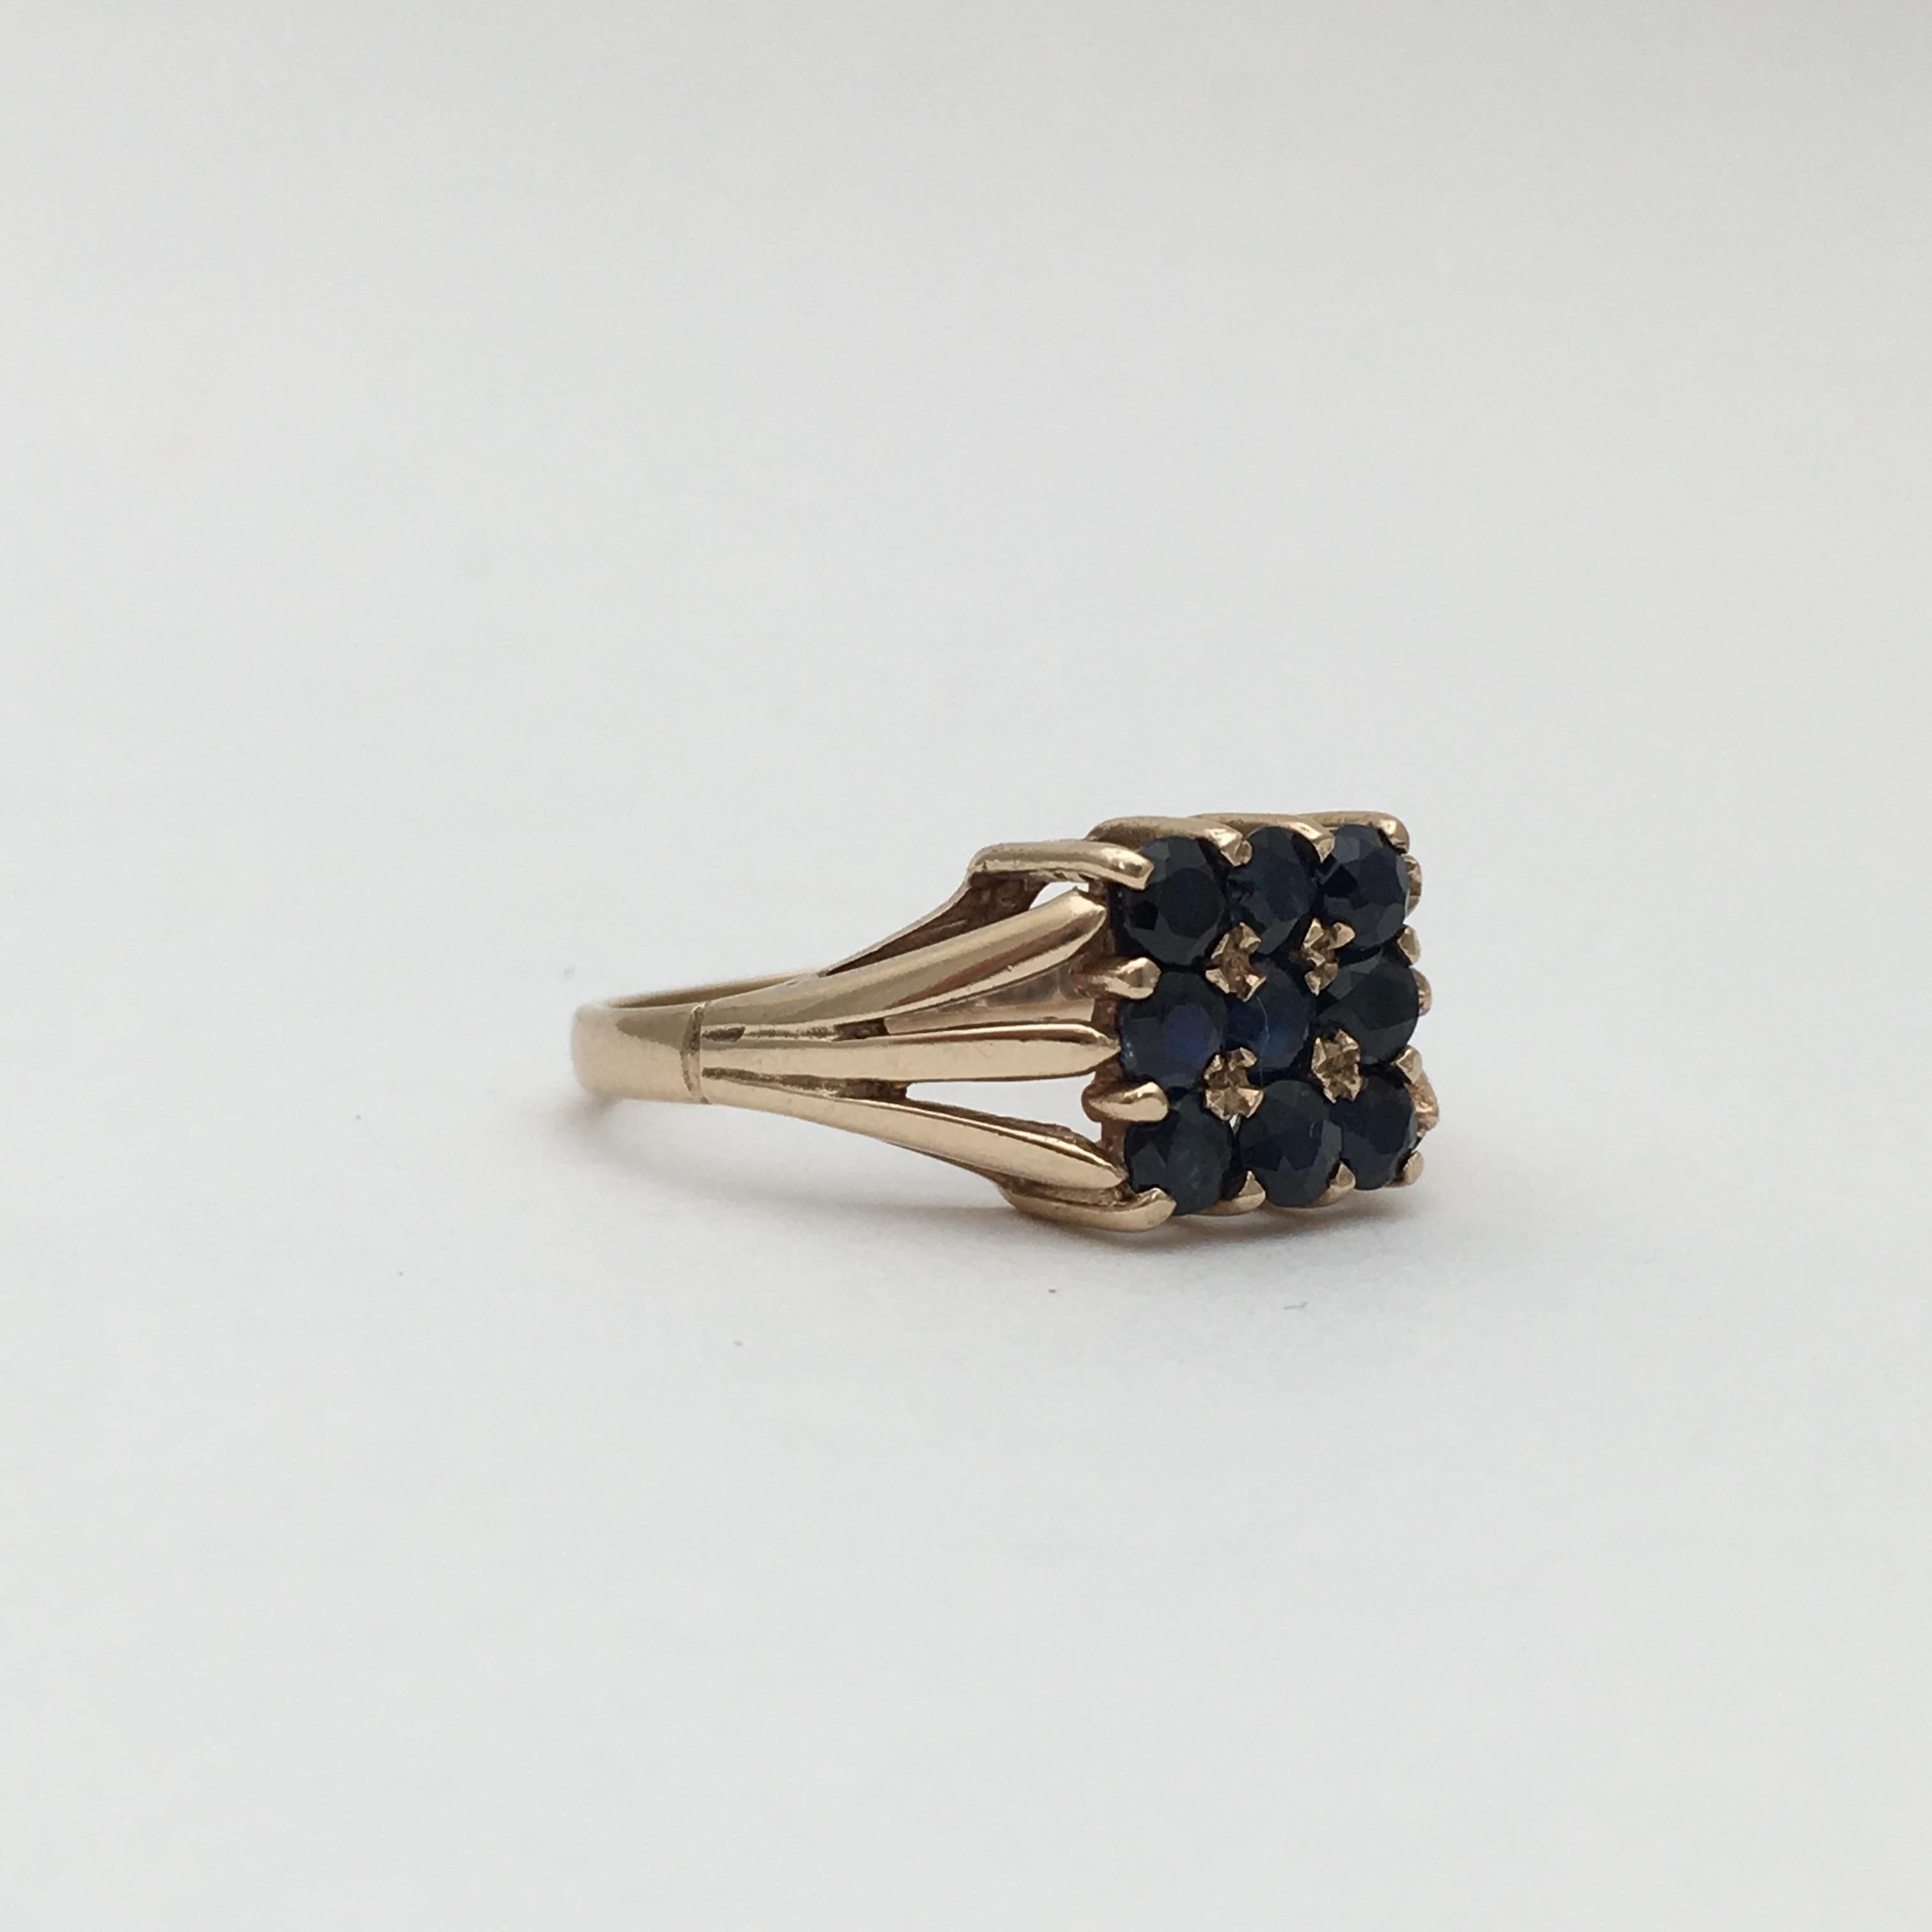 This stylish gold ring is set with nine faceted sapphires in deepest navy blue. The combination of the colour and square setting make for a very chic item, which dates from 1976. It was assayed in Birmingham, England and includes the makers mark